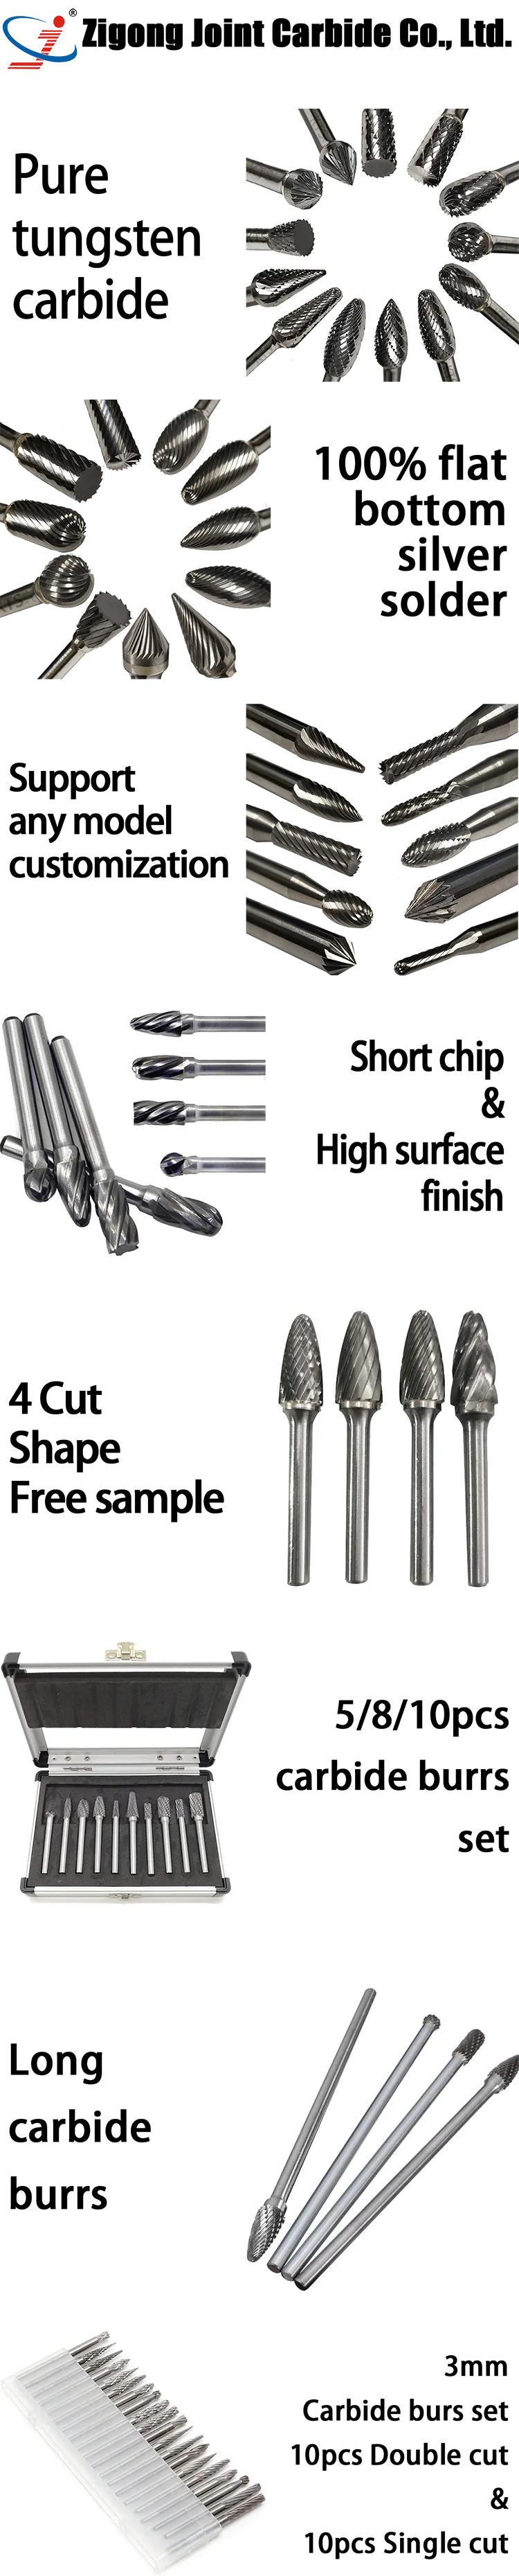 Cemented Rotary 6mm A B C D E F G H J K M N Type 1 4 Shank Dia Tungsten Rotary Carbide Burrs Buy Carbide Tungsten Burrs Carbide Bur Carbide Burrs Tungsten Product On Alibaba Com